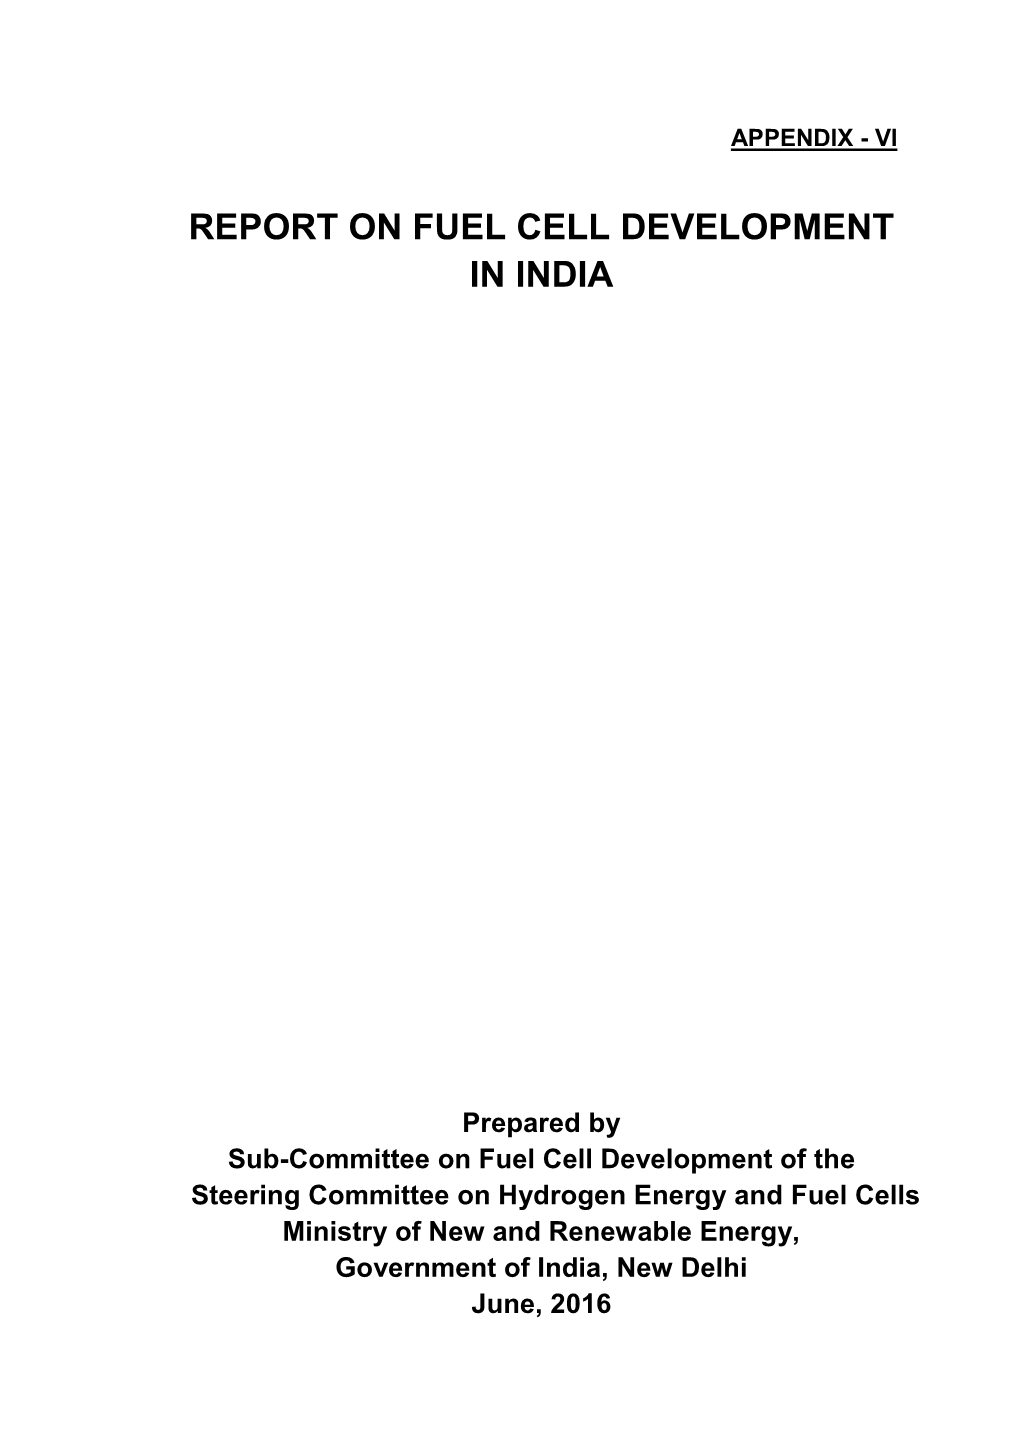 Report on Fuel Cell Development in India